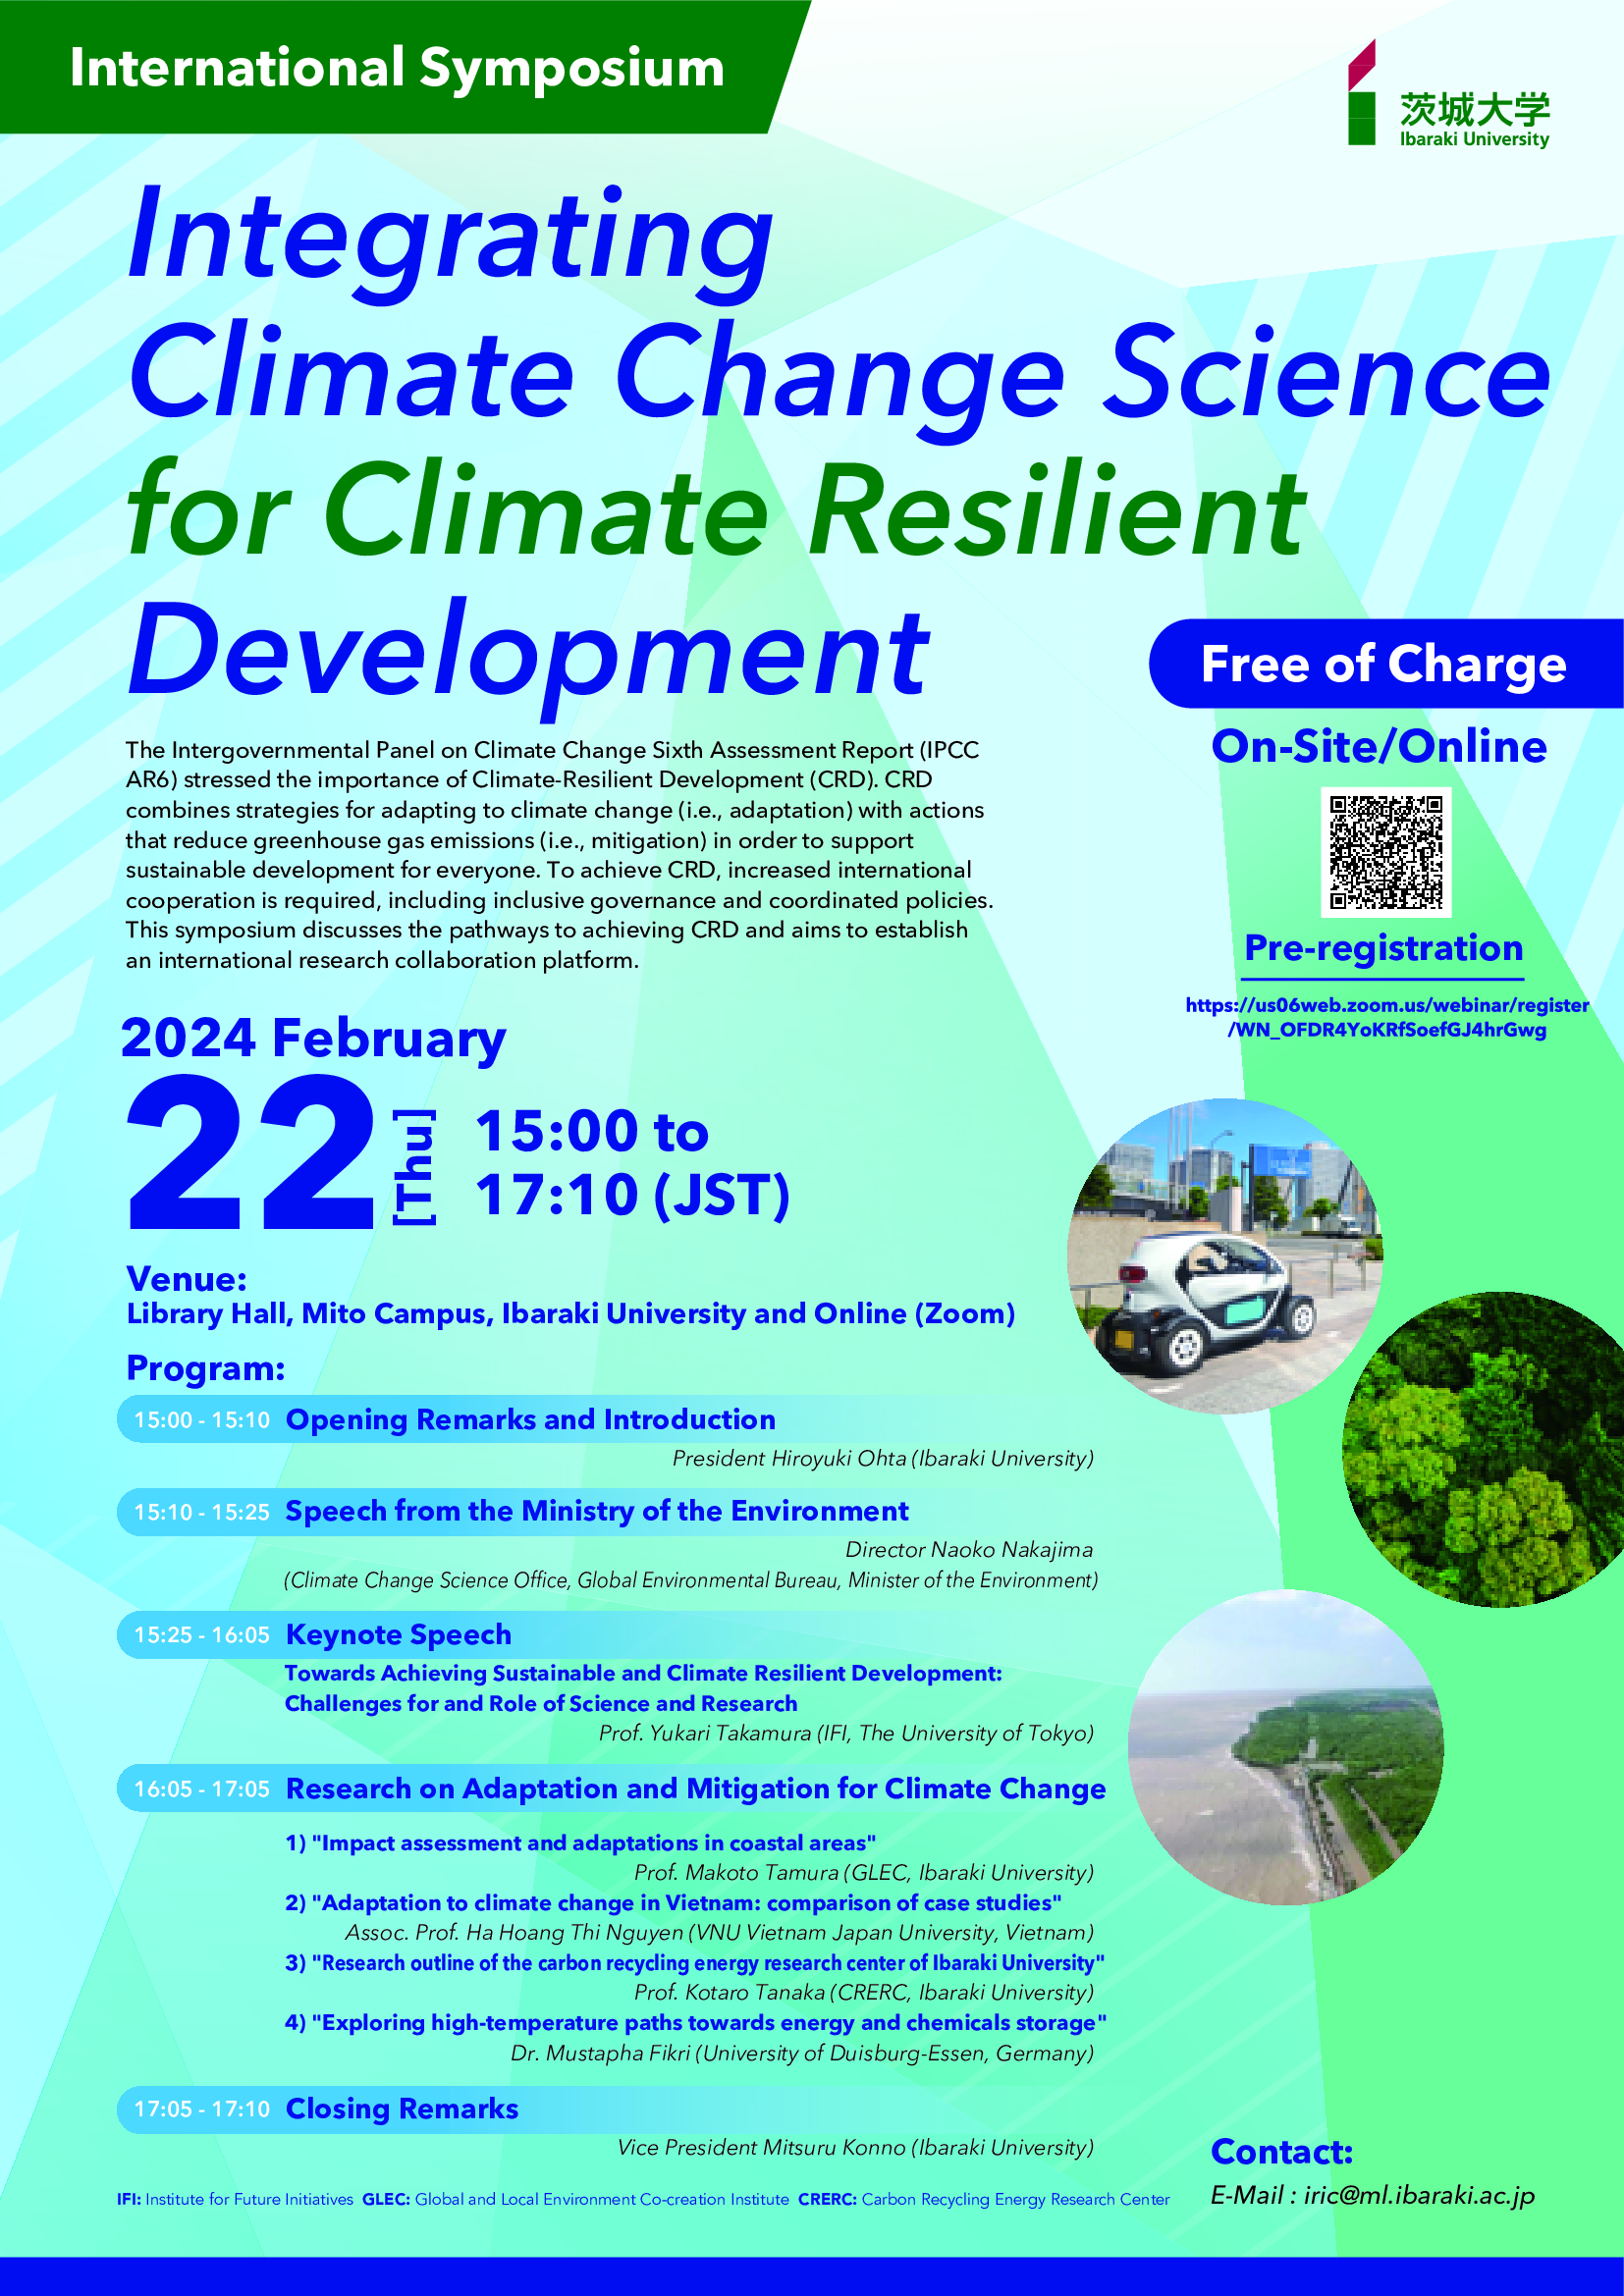 International Symposium from Ibaraki University: Integrating Climate Change Science for Climate Resilient Development